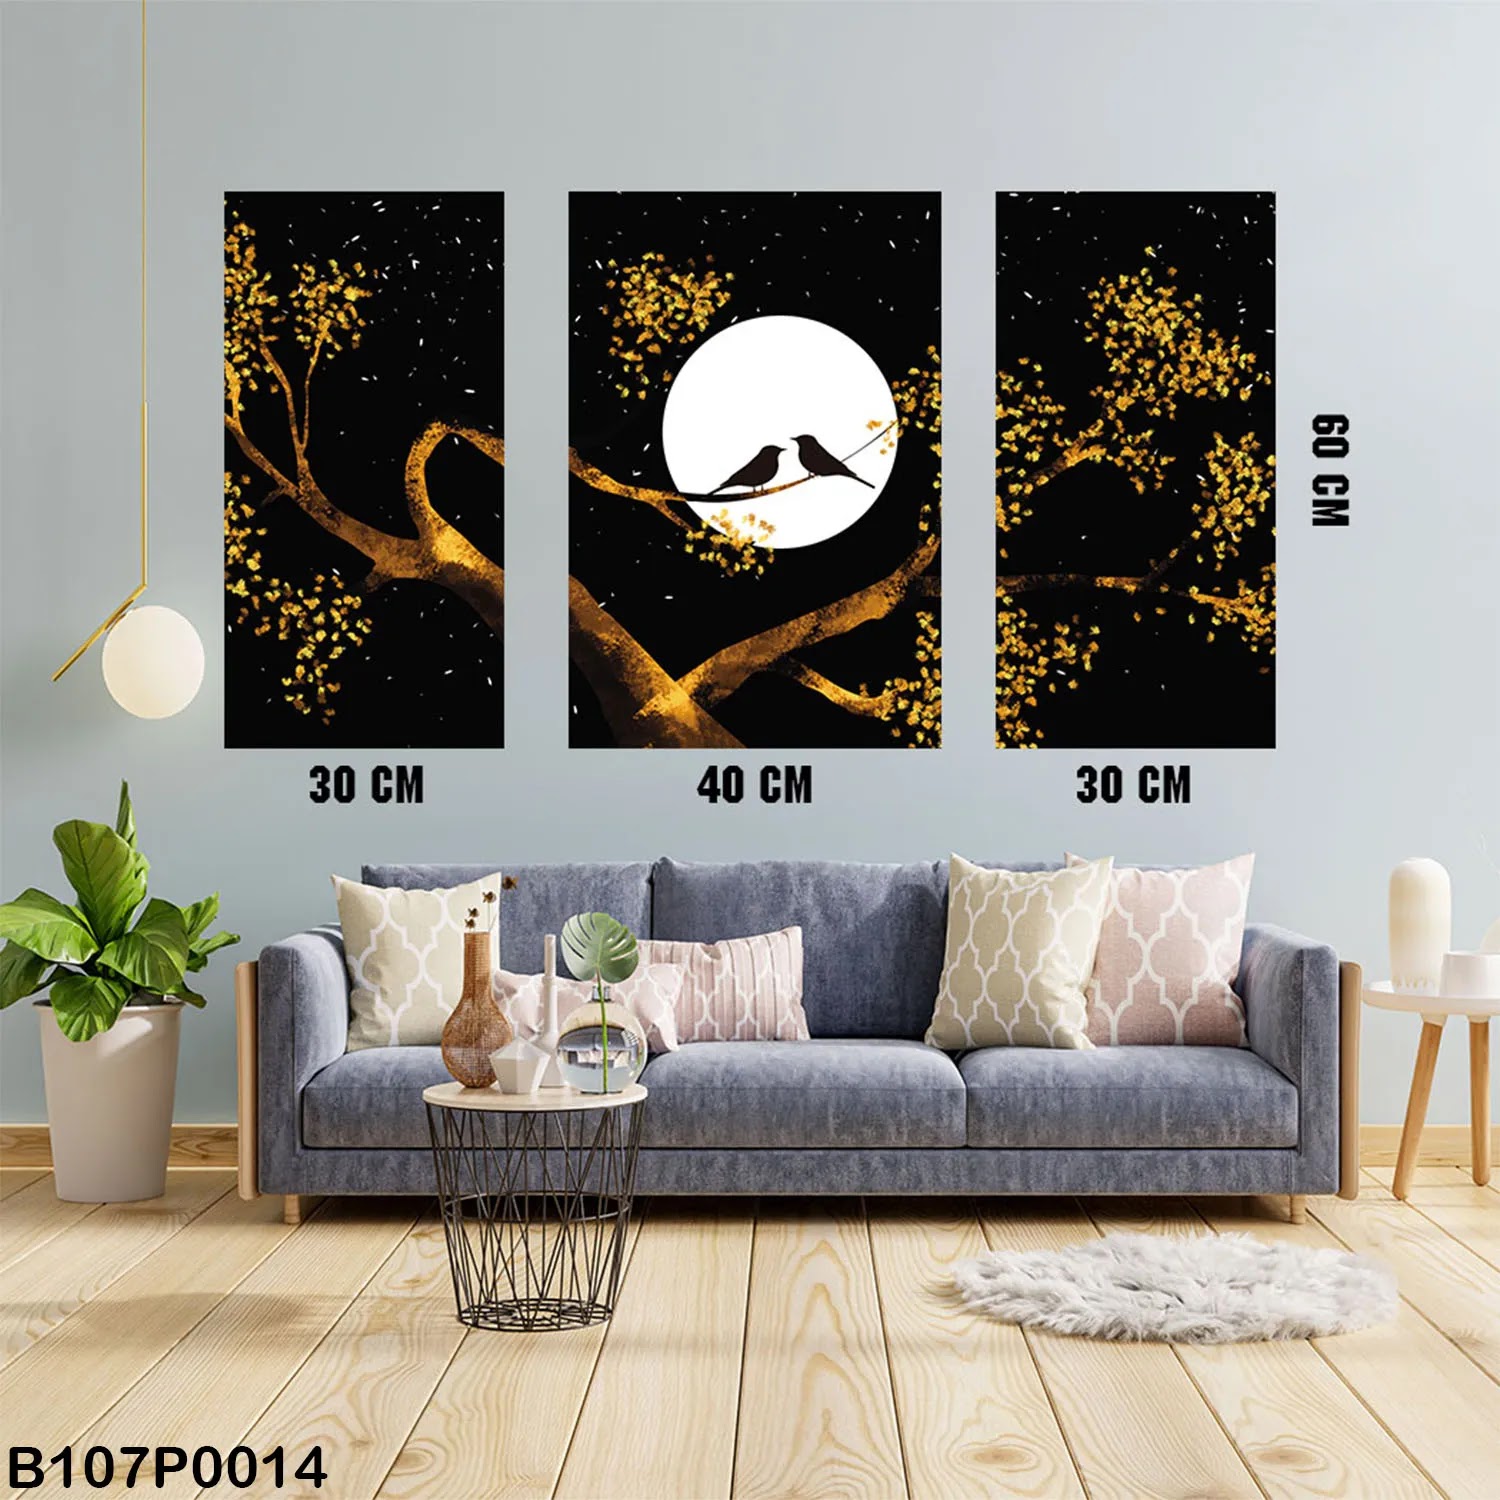 Black Triptych panel with Moon - birds - tree branches